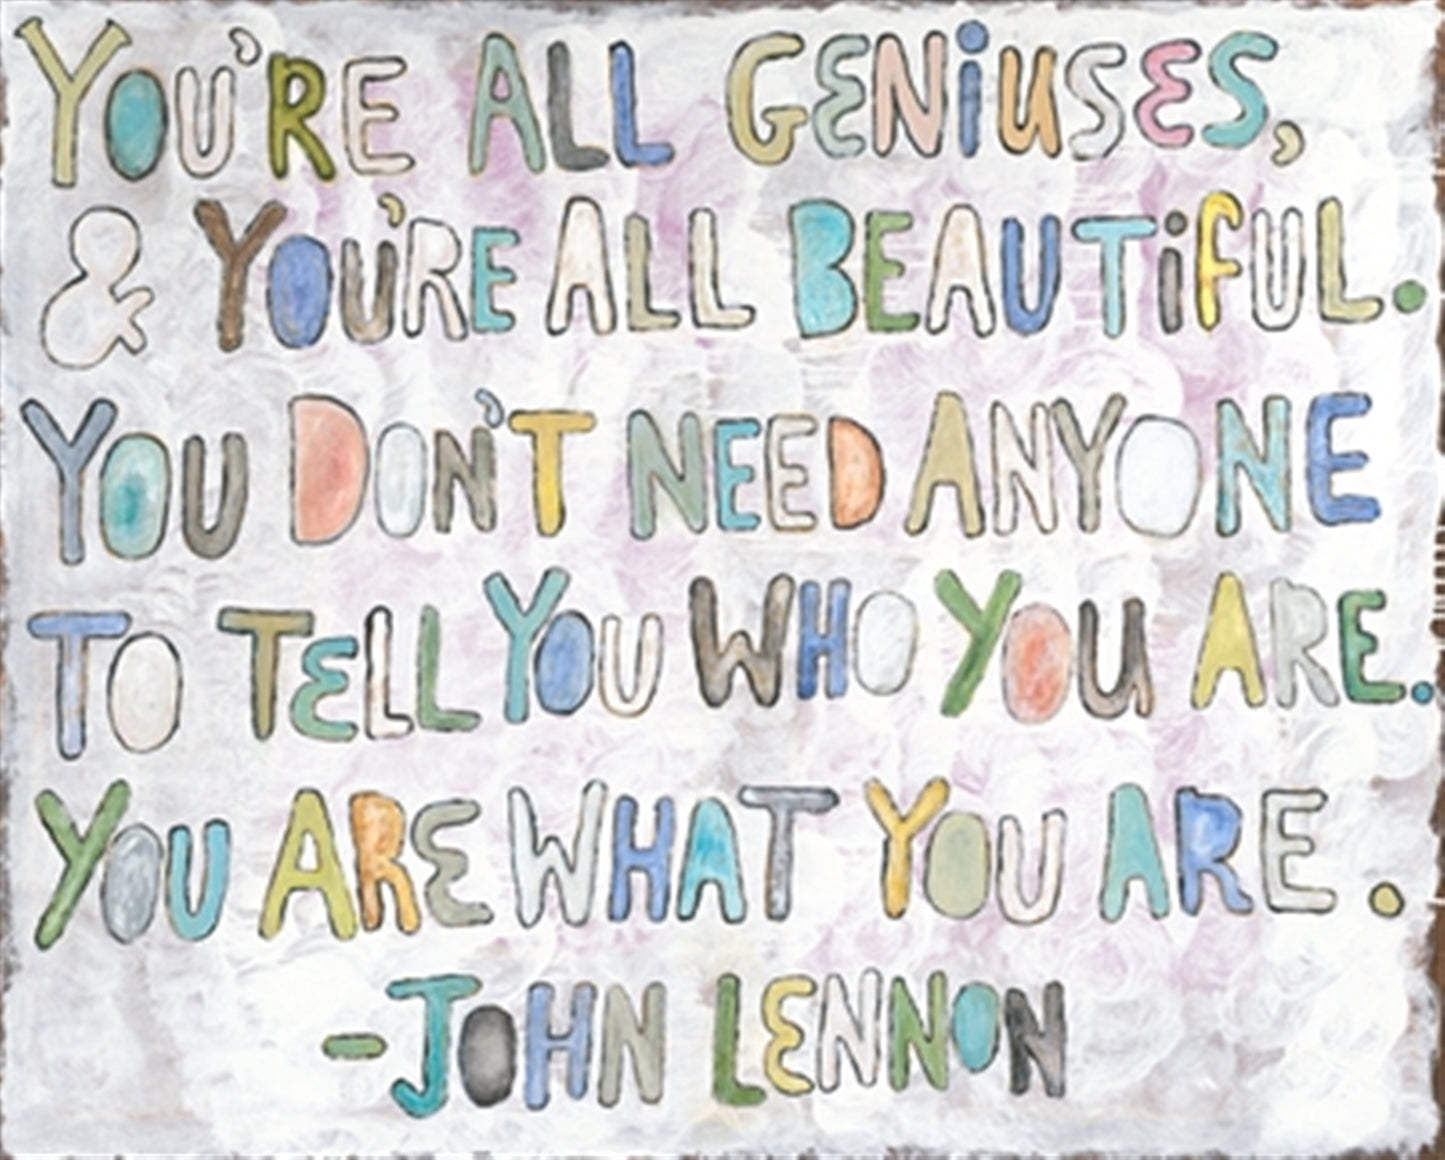 You're All Geniuses Wall Art